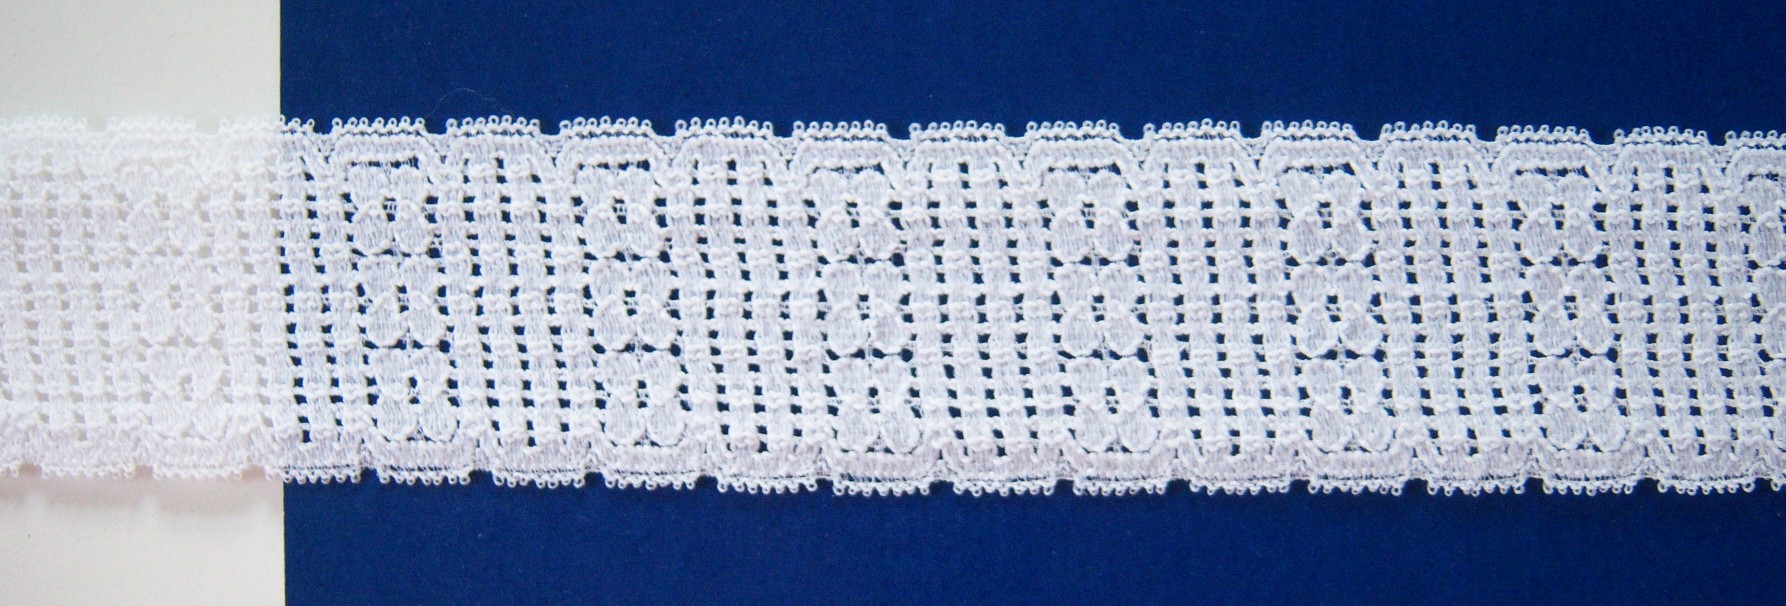 Natural White 1 3/4" Stretch Lace